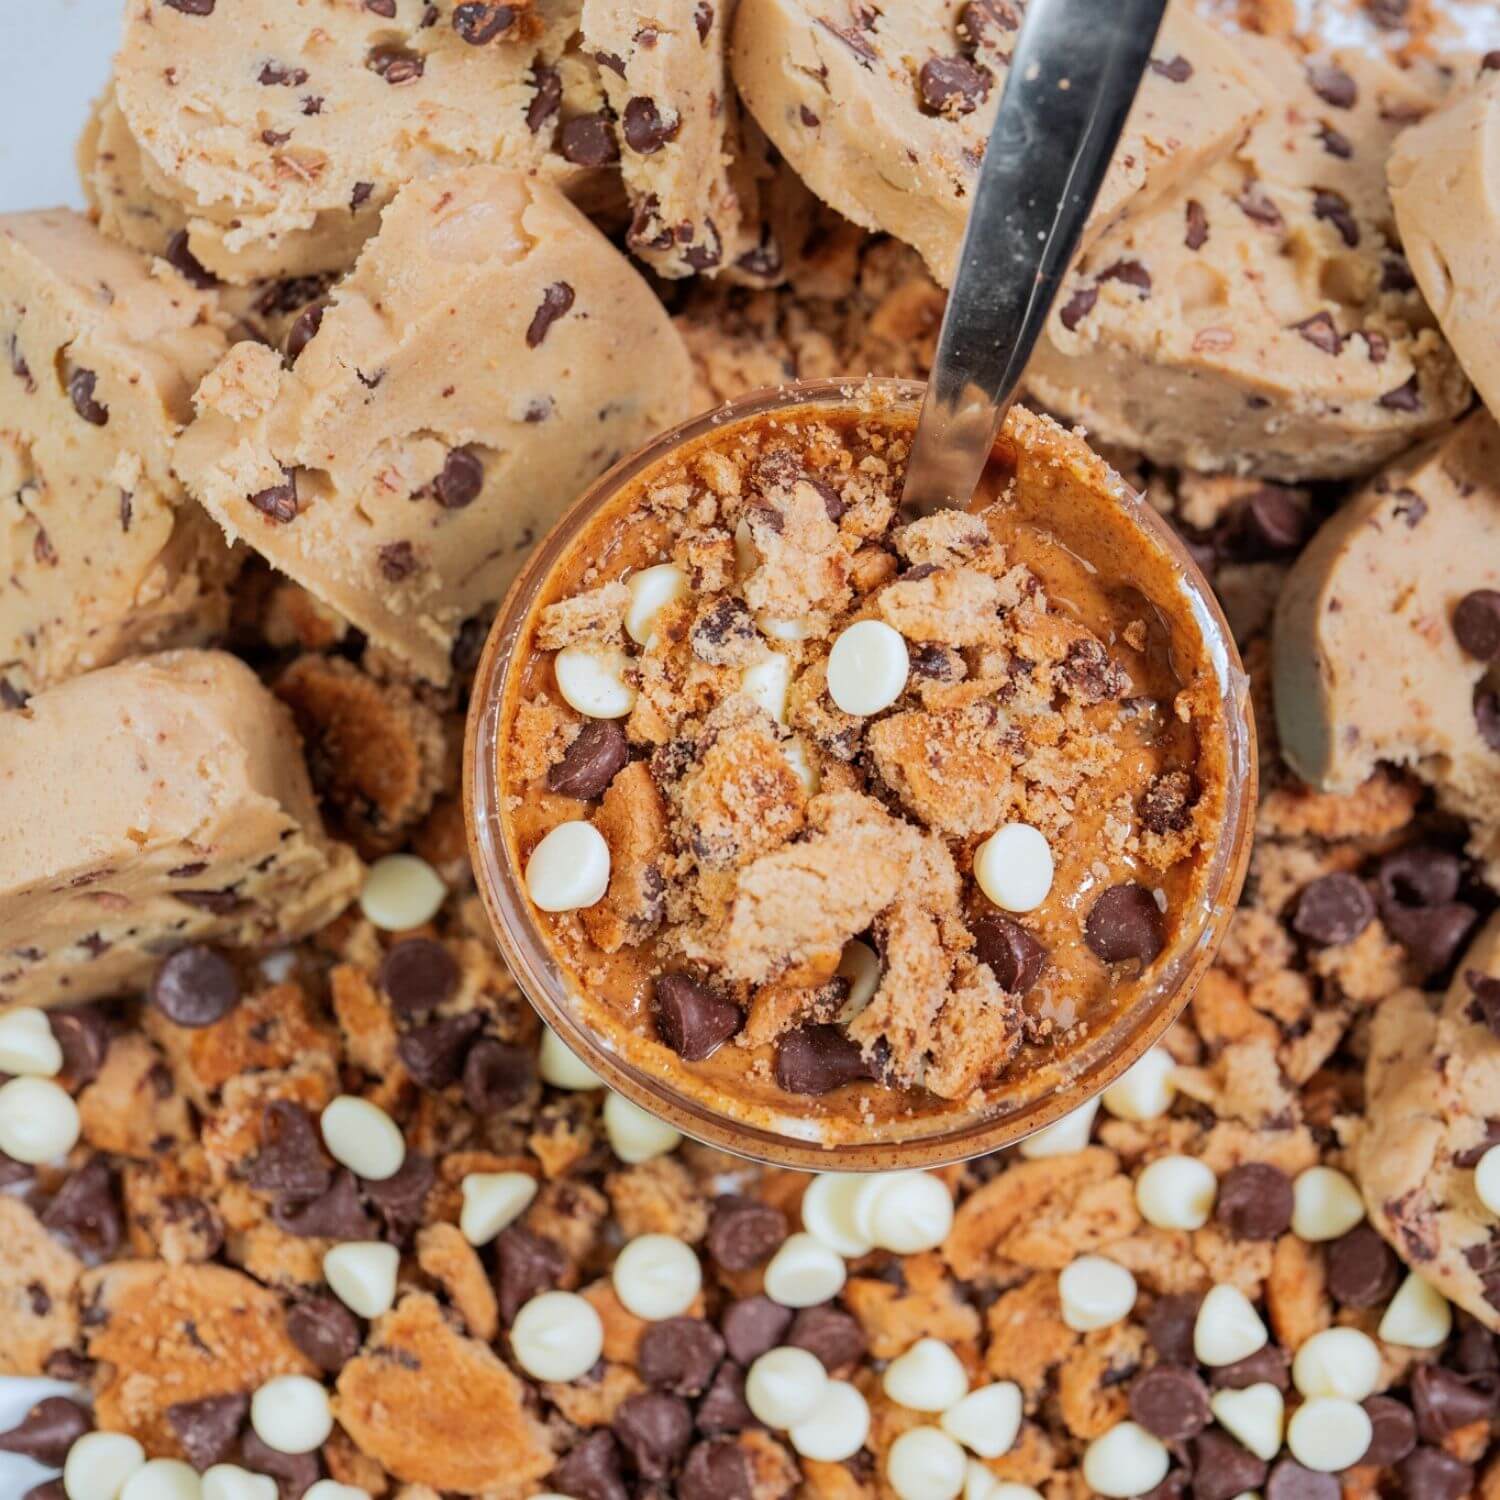 Triple Chip Cookie Almond Butter